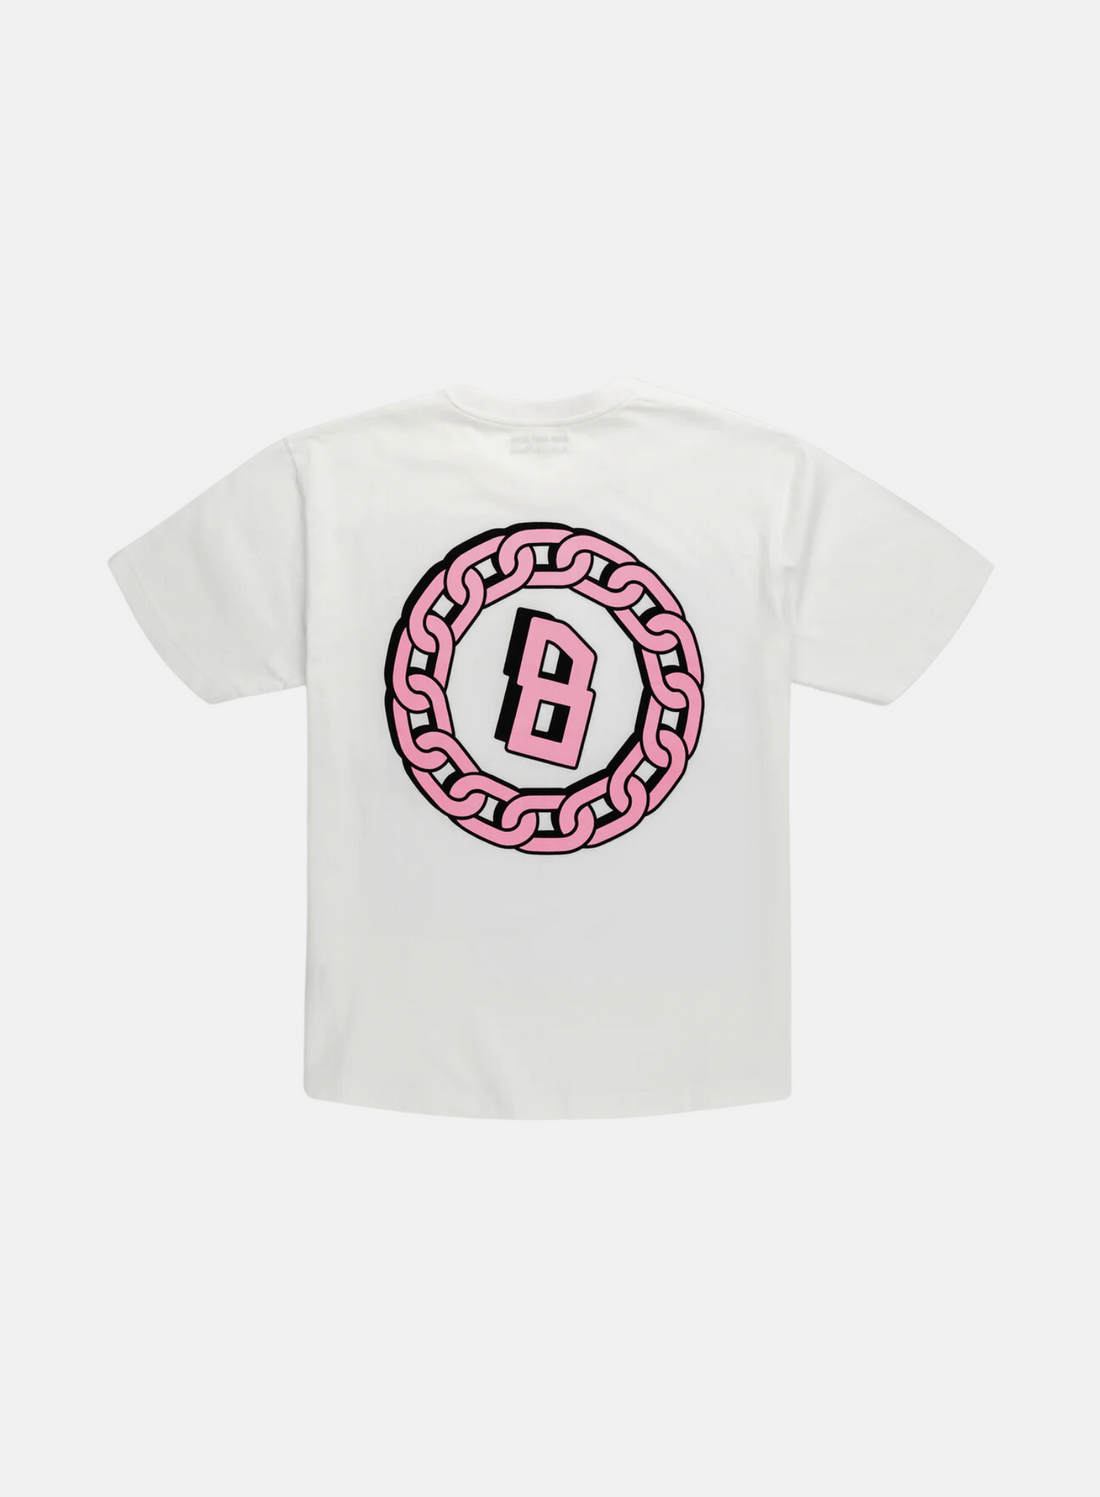 BISOUS SKATEBOARDS ADM Tee White - Hympala Store 